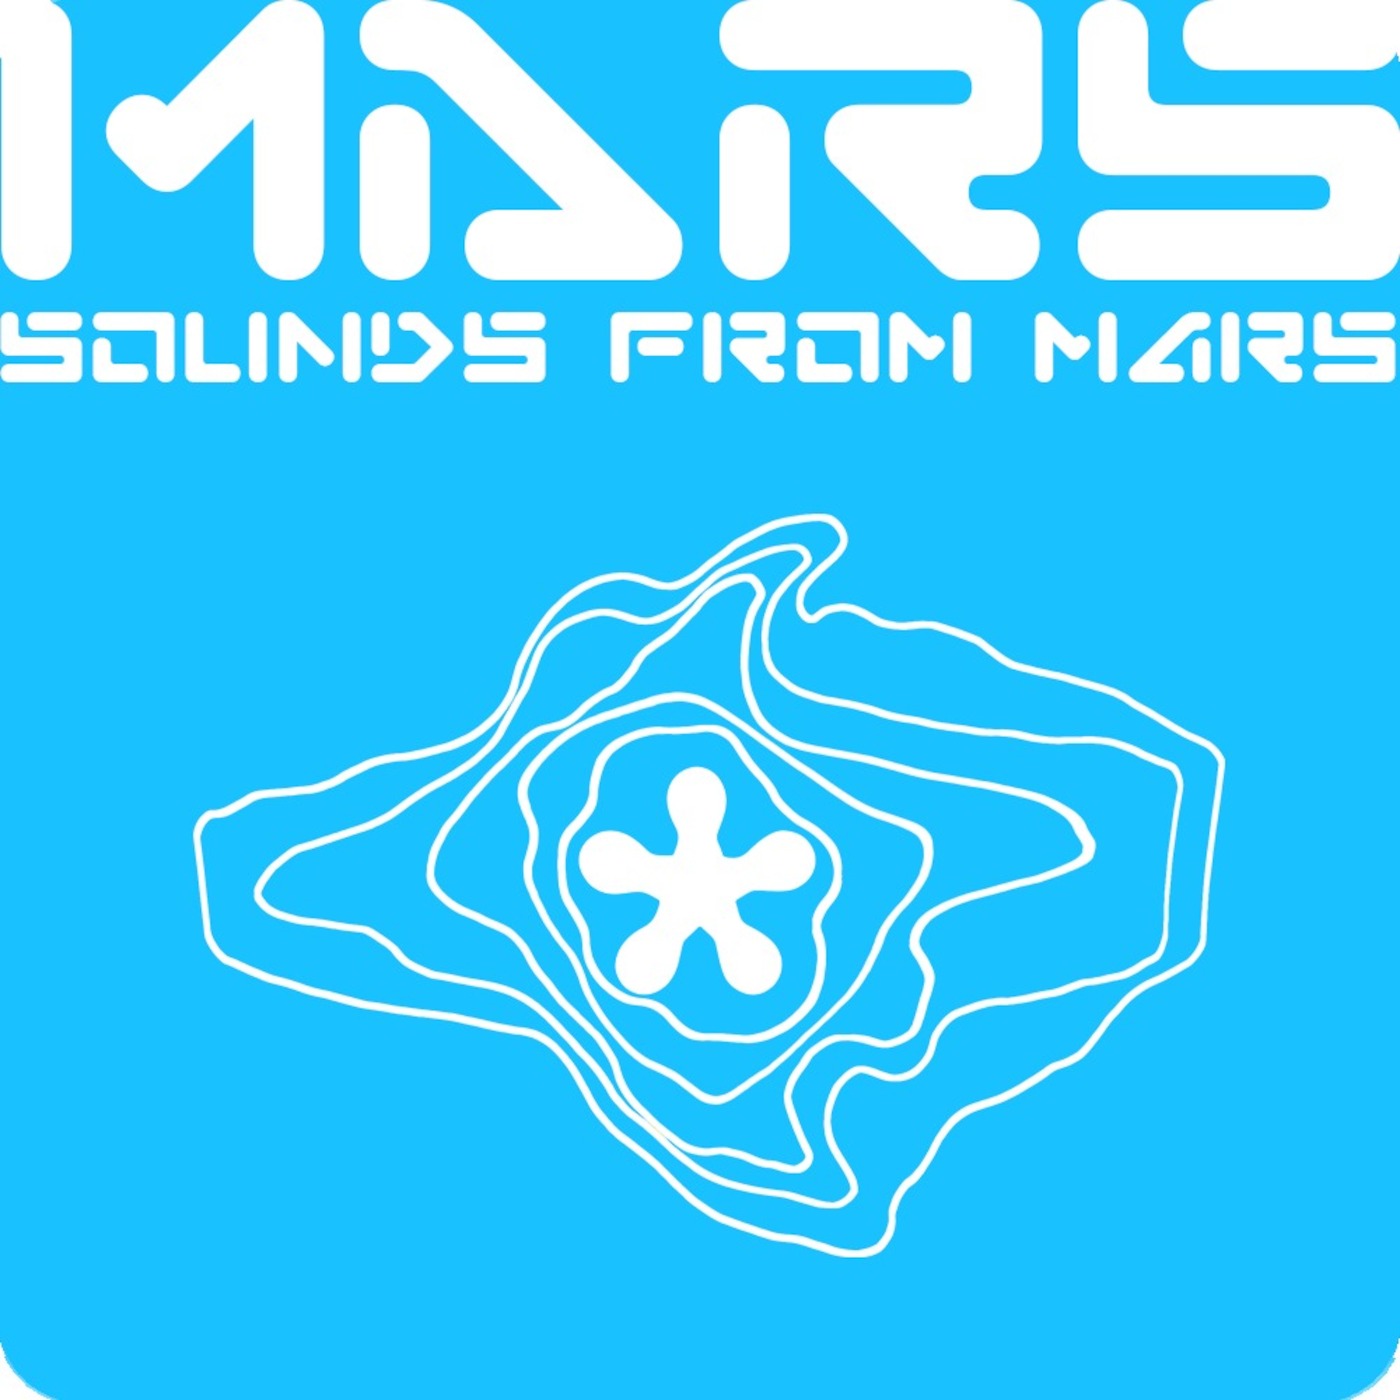 Sounds from mars podcast #018-NYE 2016-pt.2